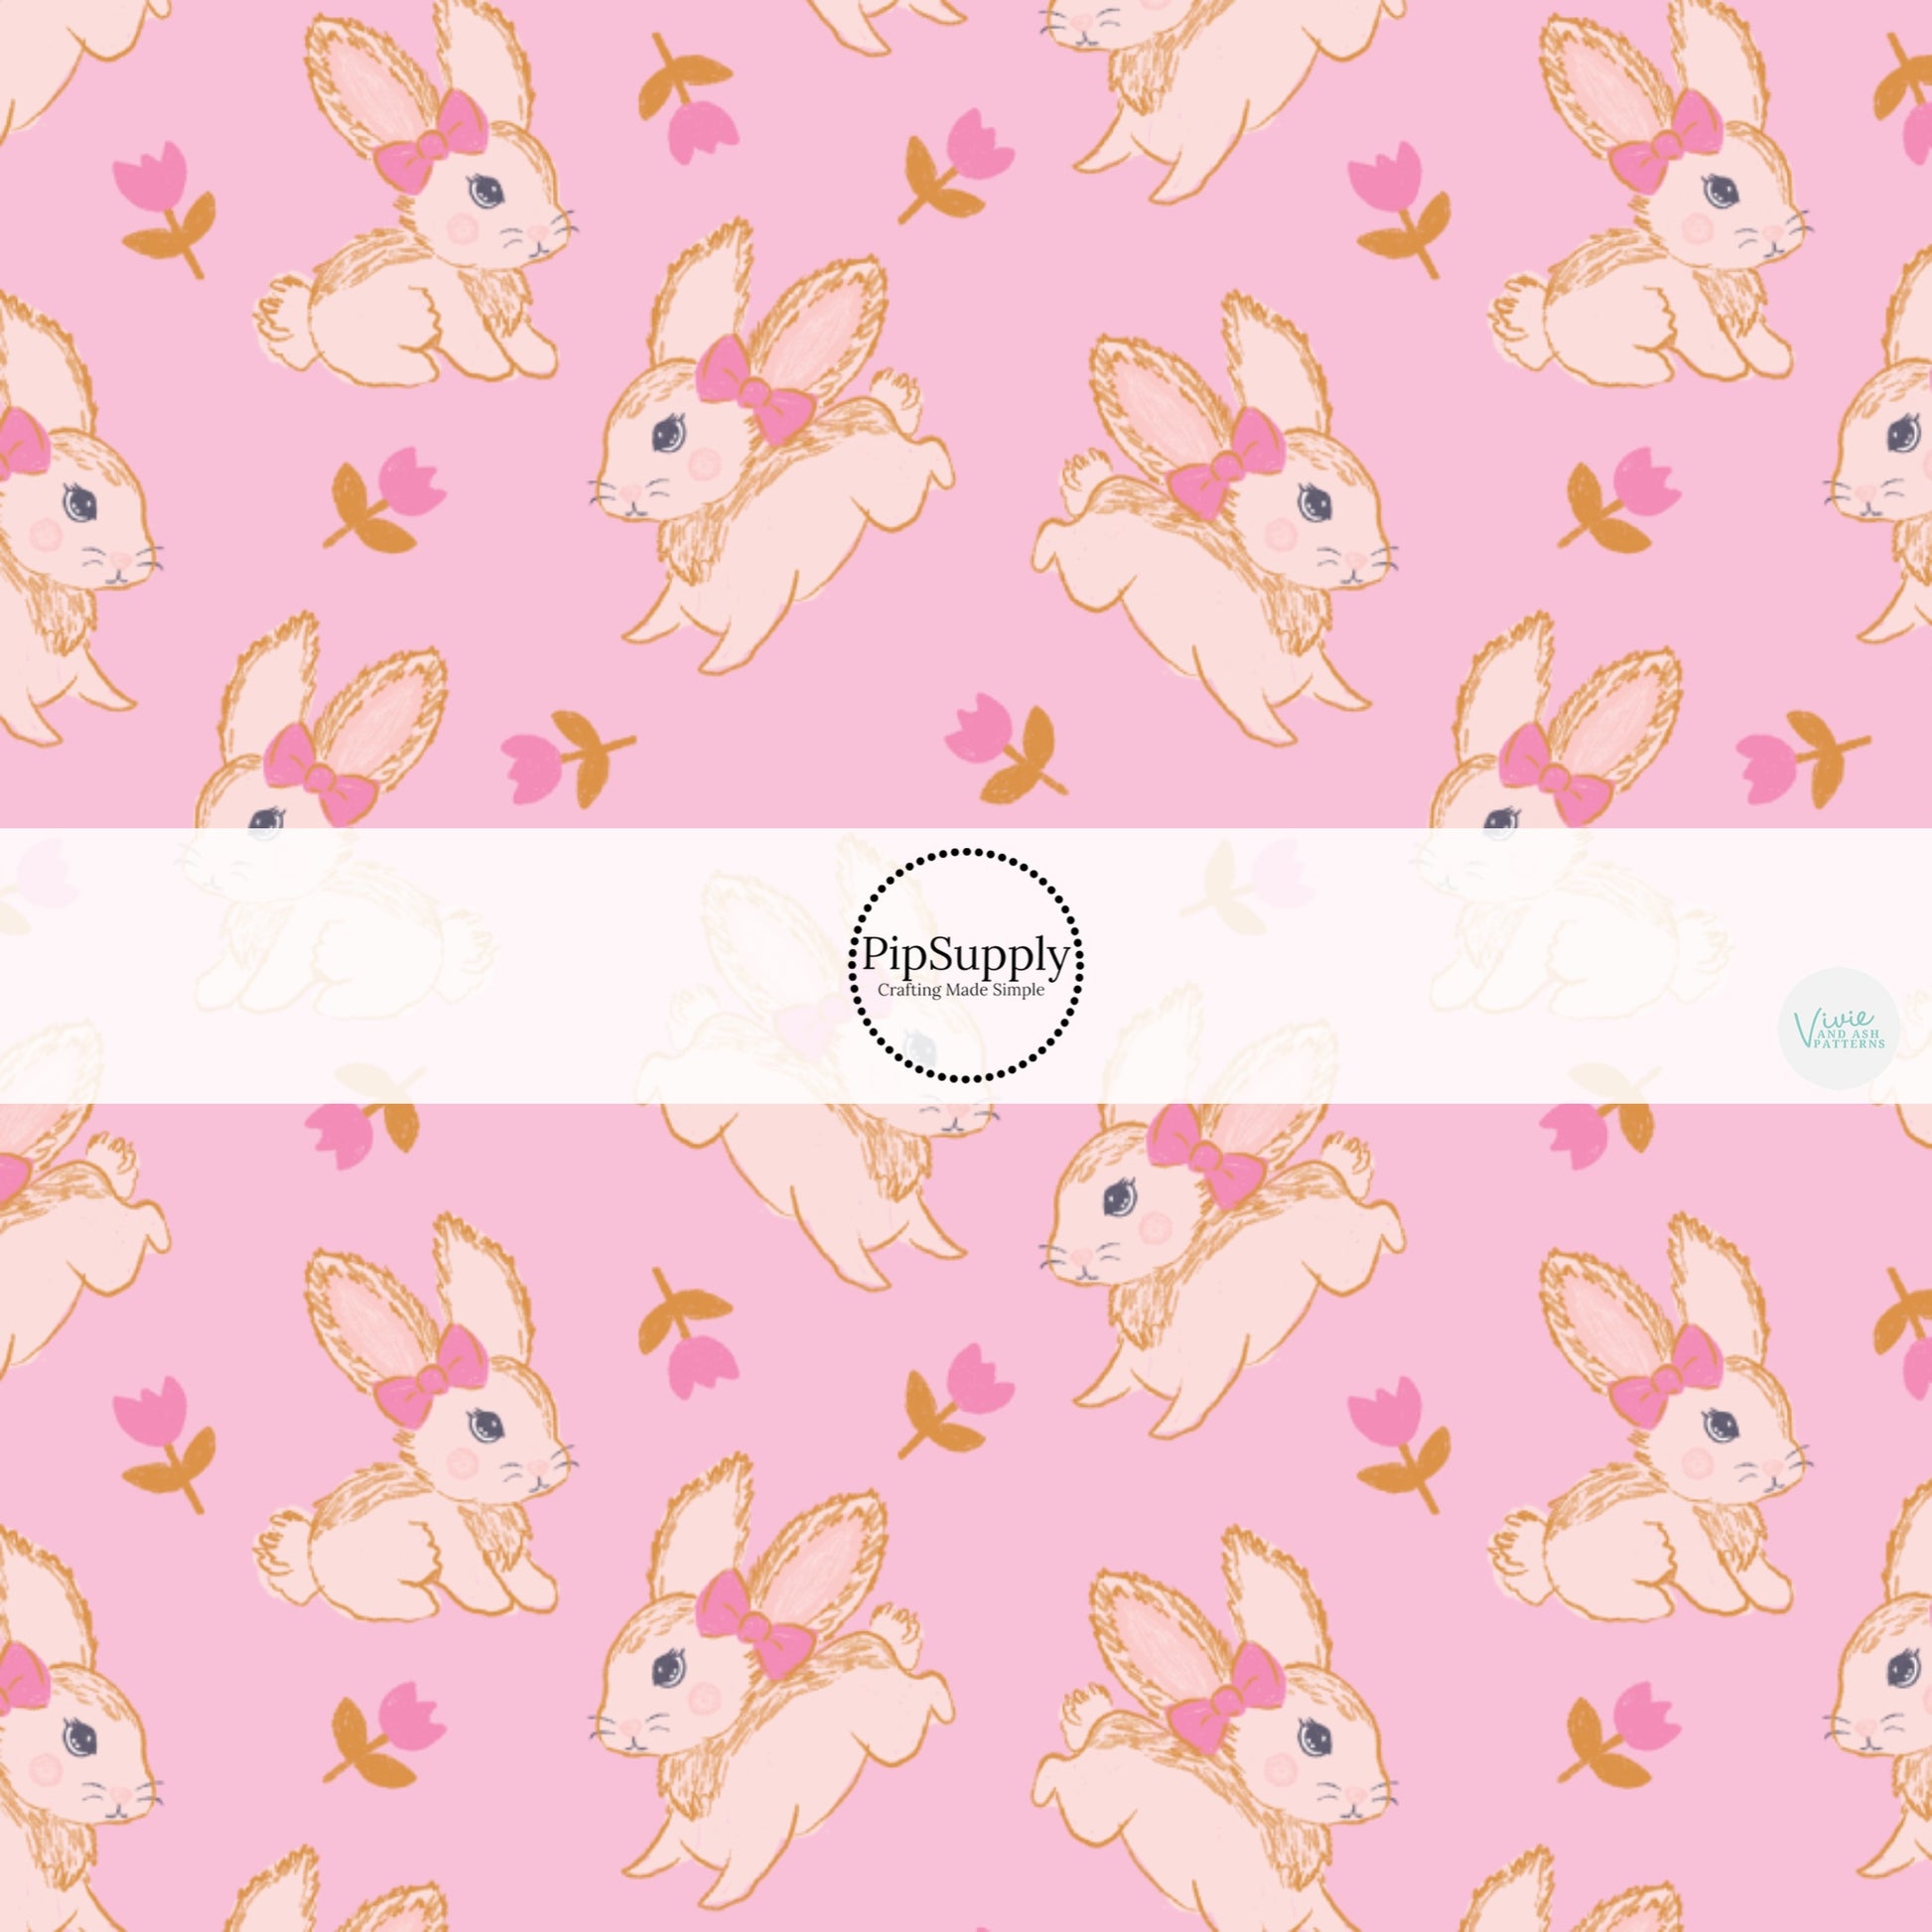 These spring patterned headband kits are easy to assemble and come with everything you need to make your own knotted headband. These kits include a custom printed and sewn fabric strip and a coordinating velvet headband. This cute pattern features pink tulips surrounding cream bunnies on light pink. 